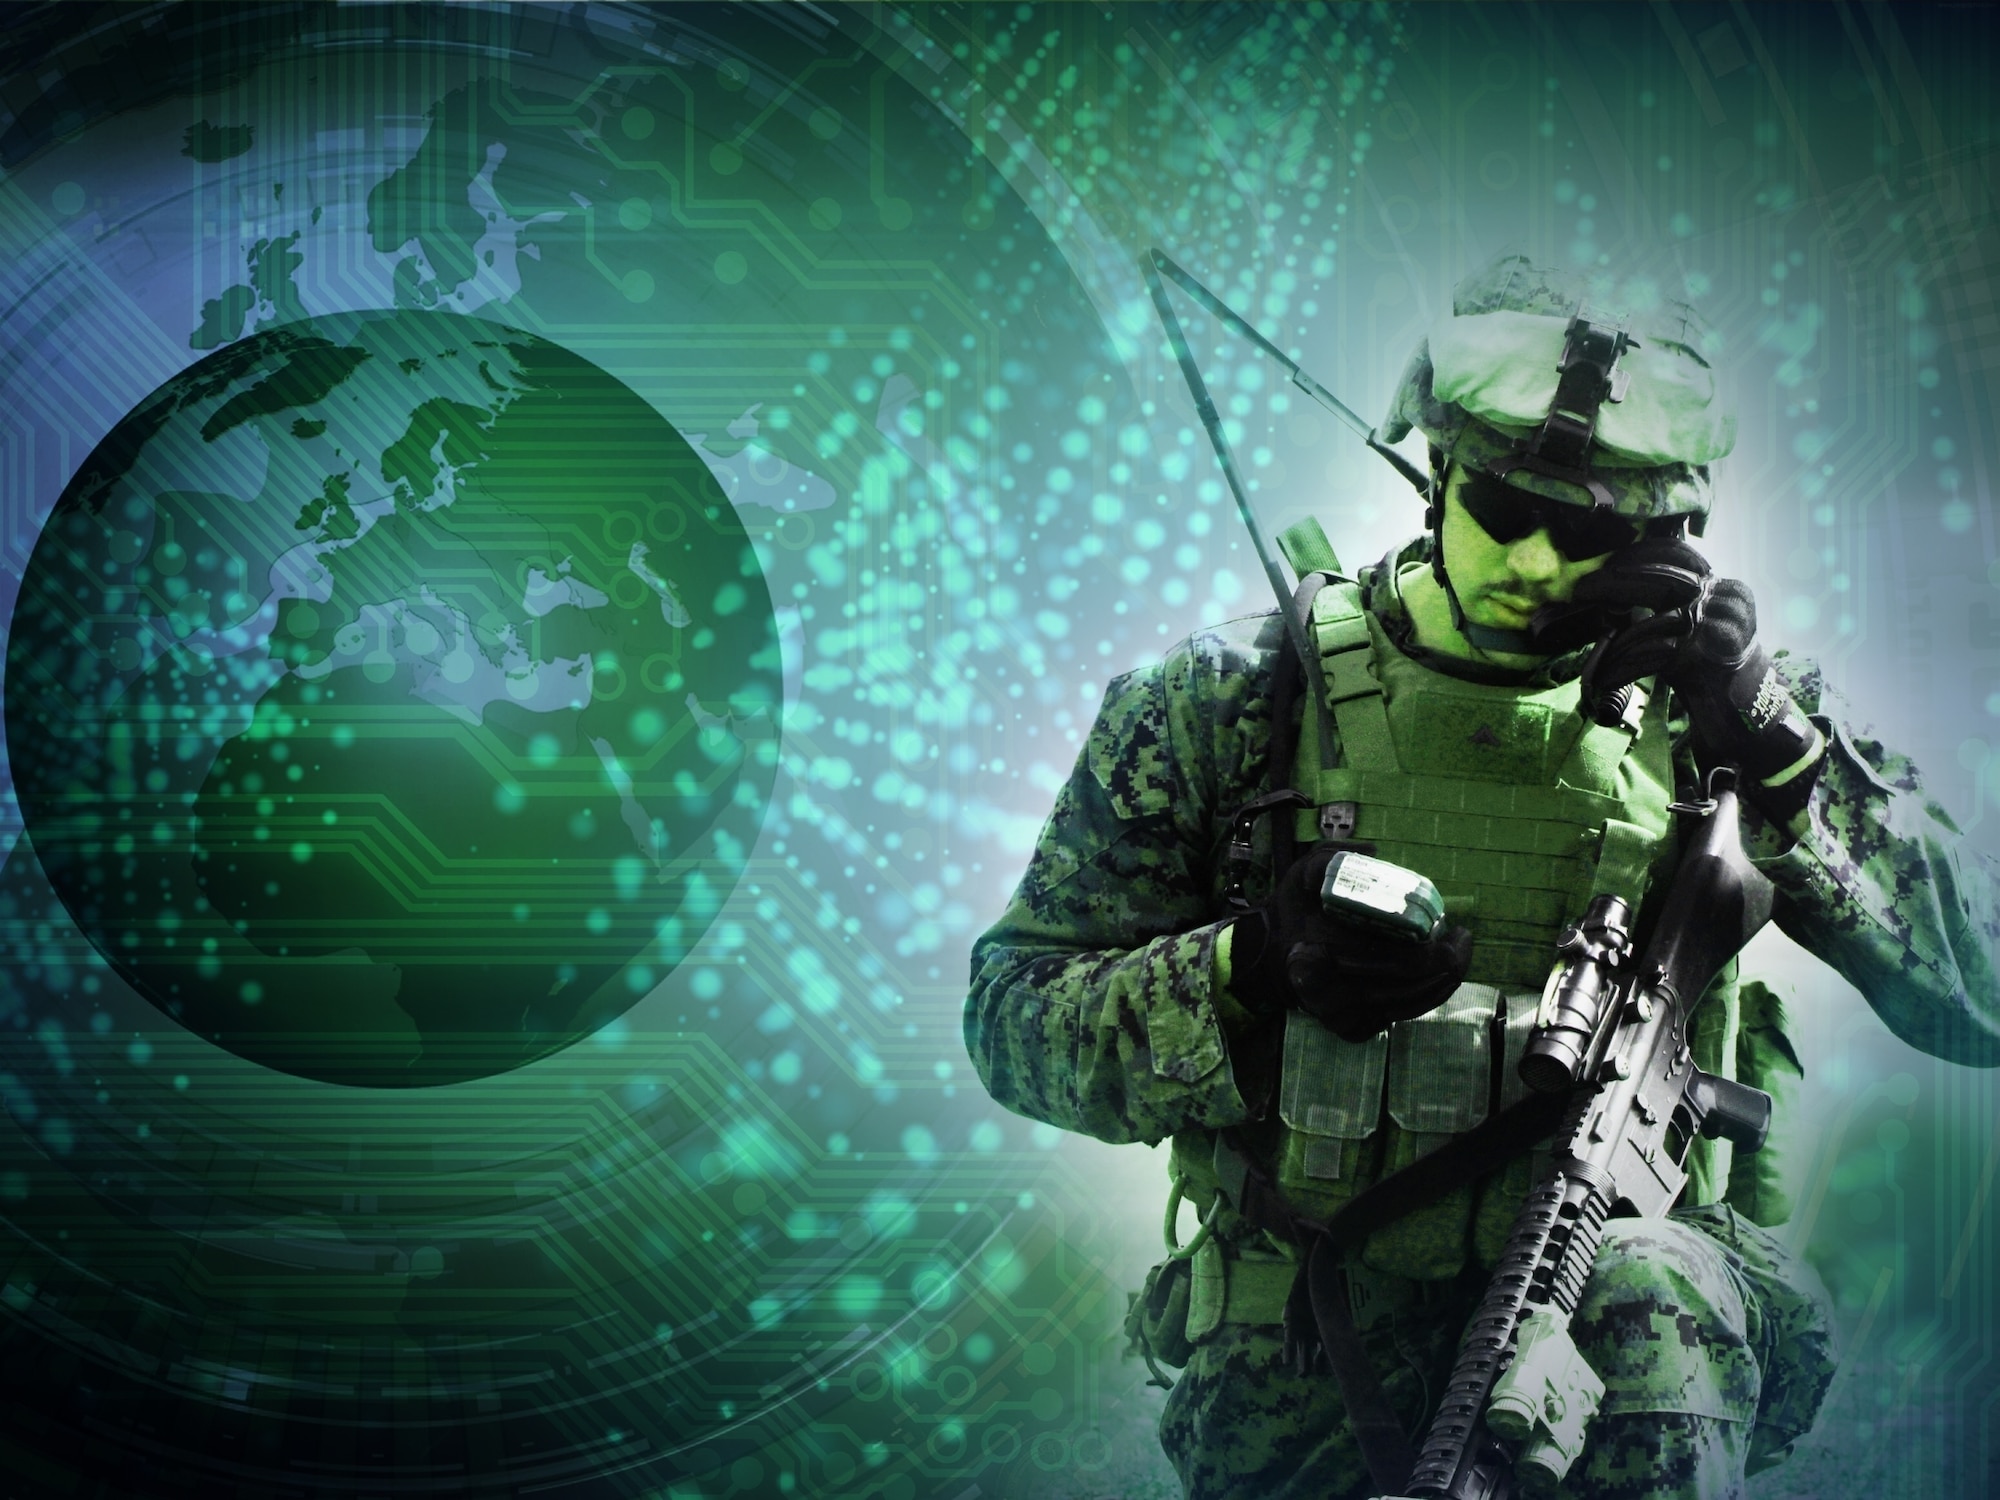 Air Force Life Cycle Management Center, Hanscom Air Force Base, Mass., is studying how cloud computing could safely provide data to users who need it, even in degraded environments, like those encountered by ground troops in combat. (Department of Defense graphic illustration)